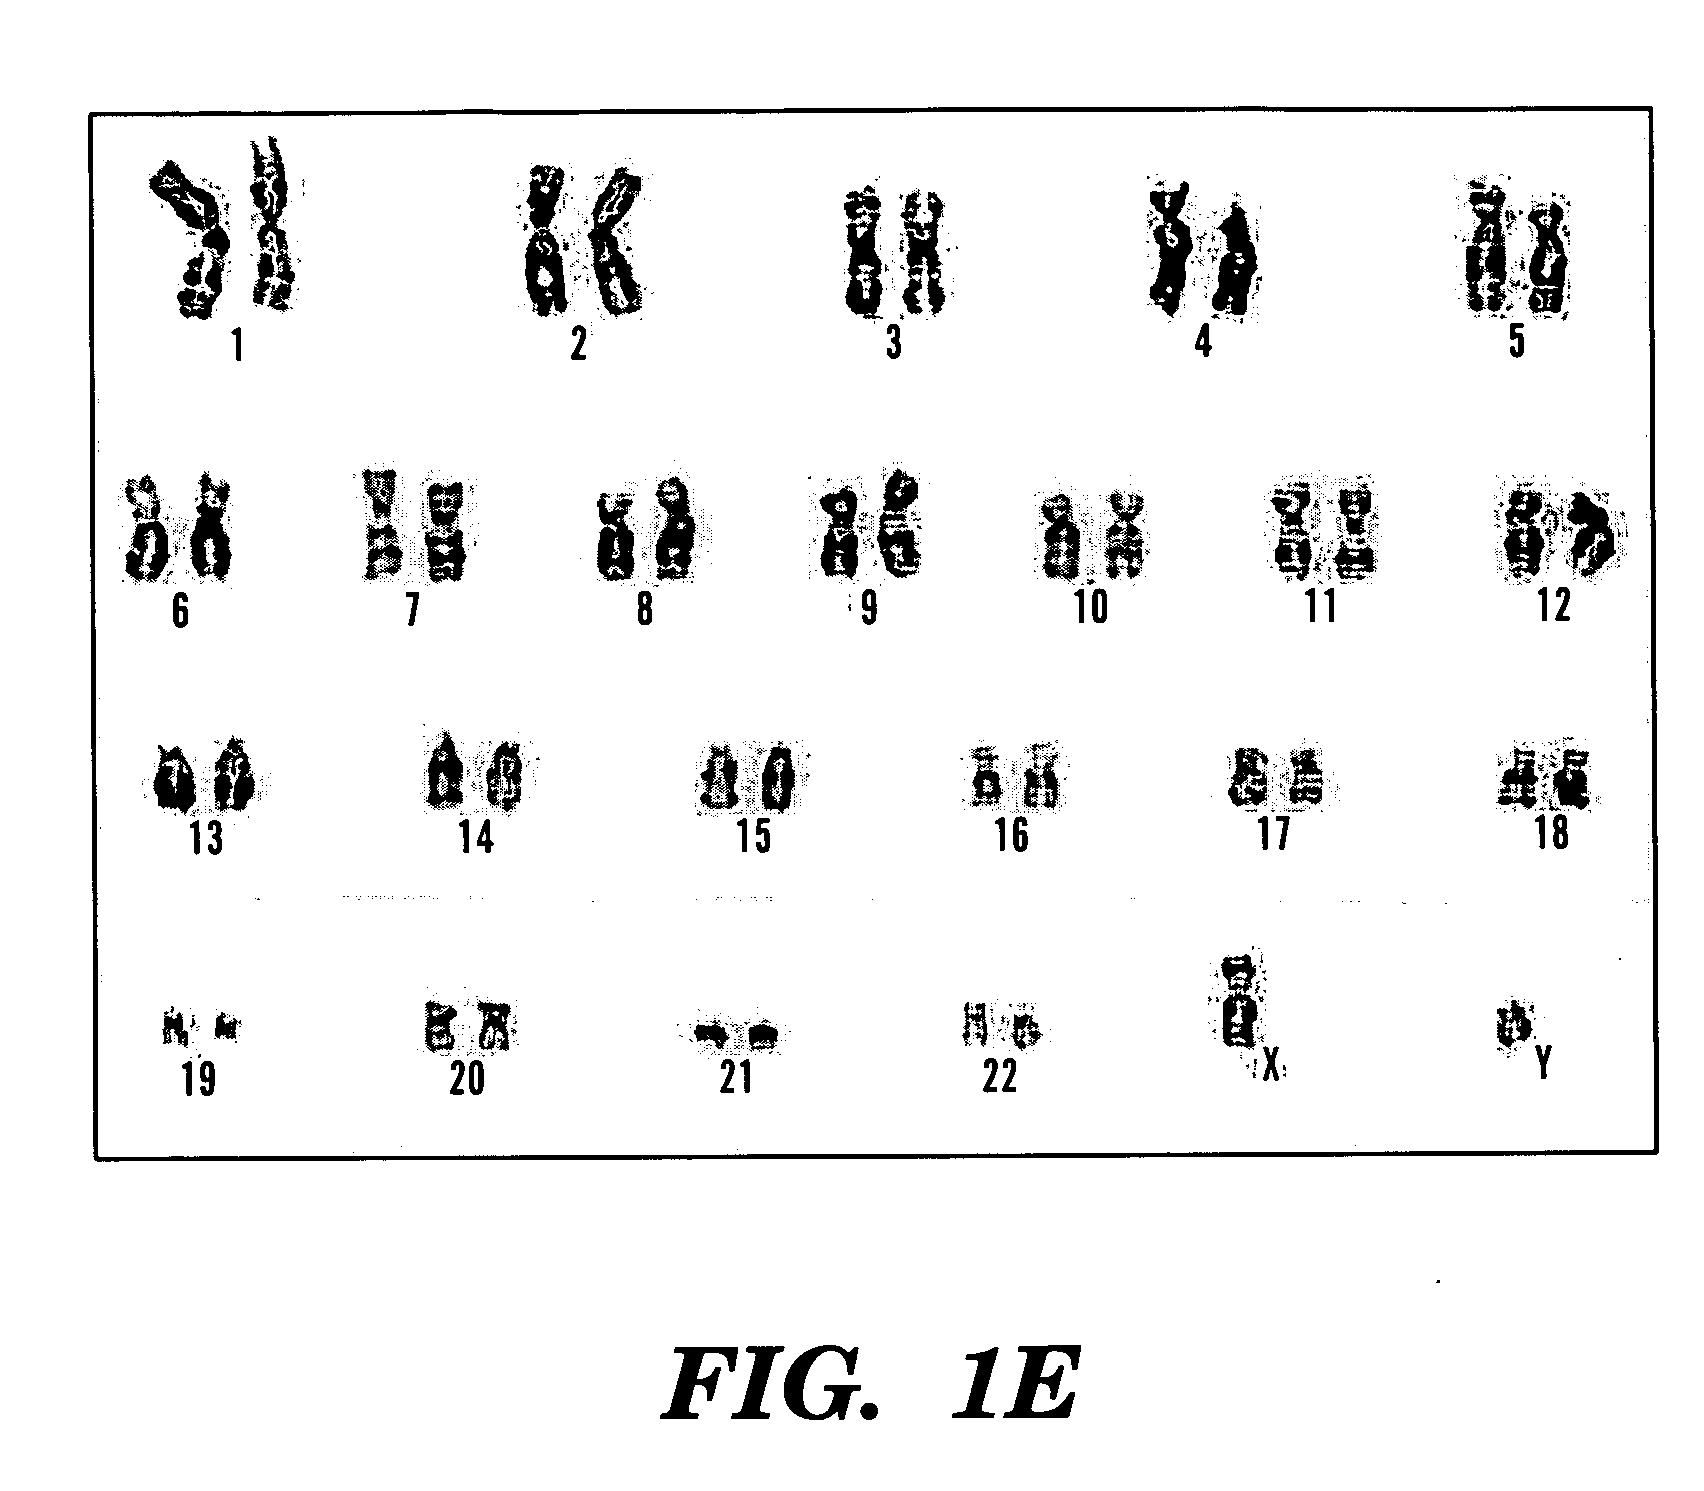 Methods of isolation, expansion and differentiation of fetal stem cells from chorionic villus, amniotic fluid, and placenta and therapeutic uses thereof